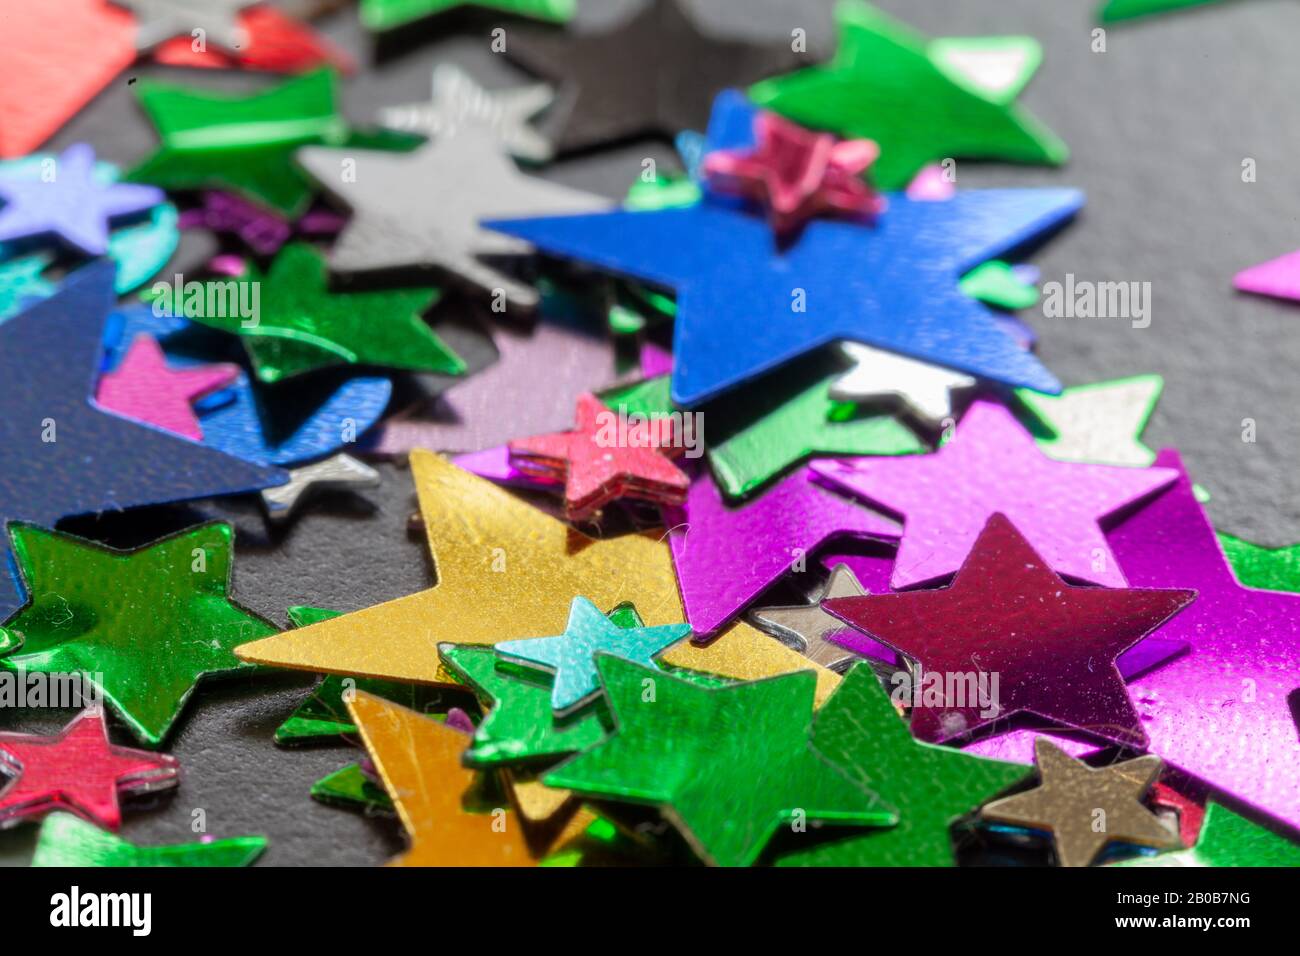 Party confetti multi colored stars and shaped close up scatted on a black table Stock Photo